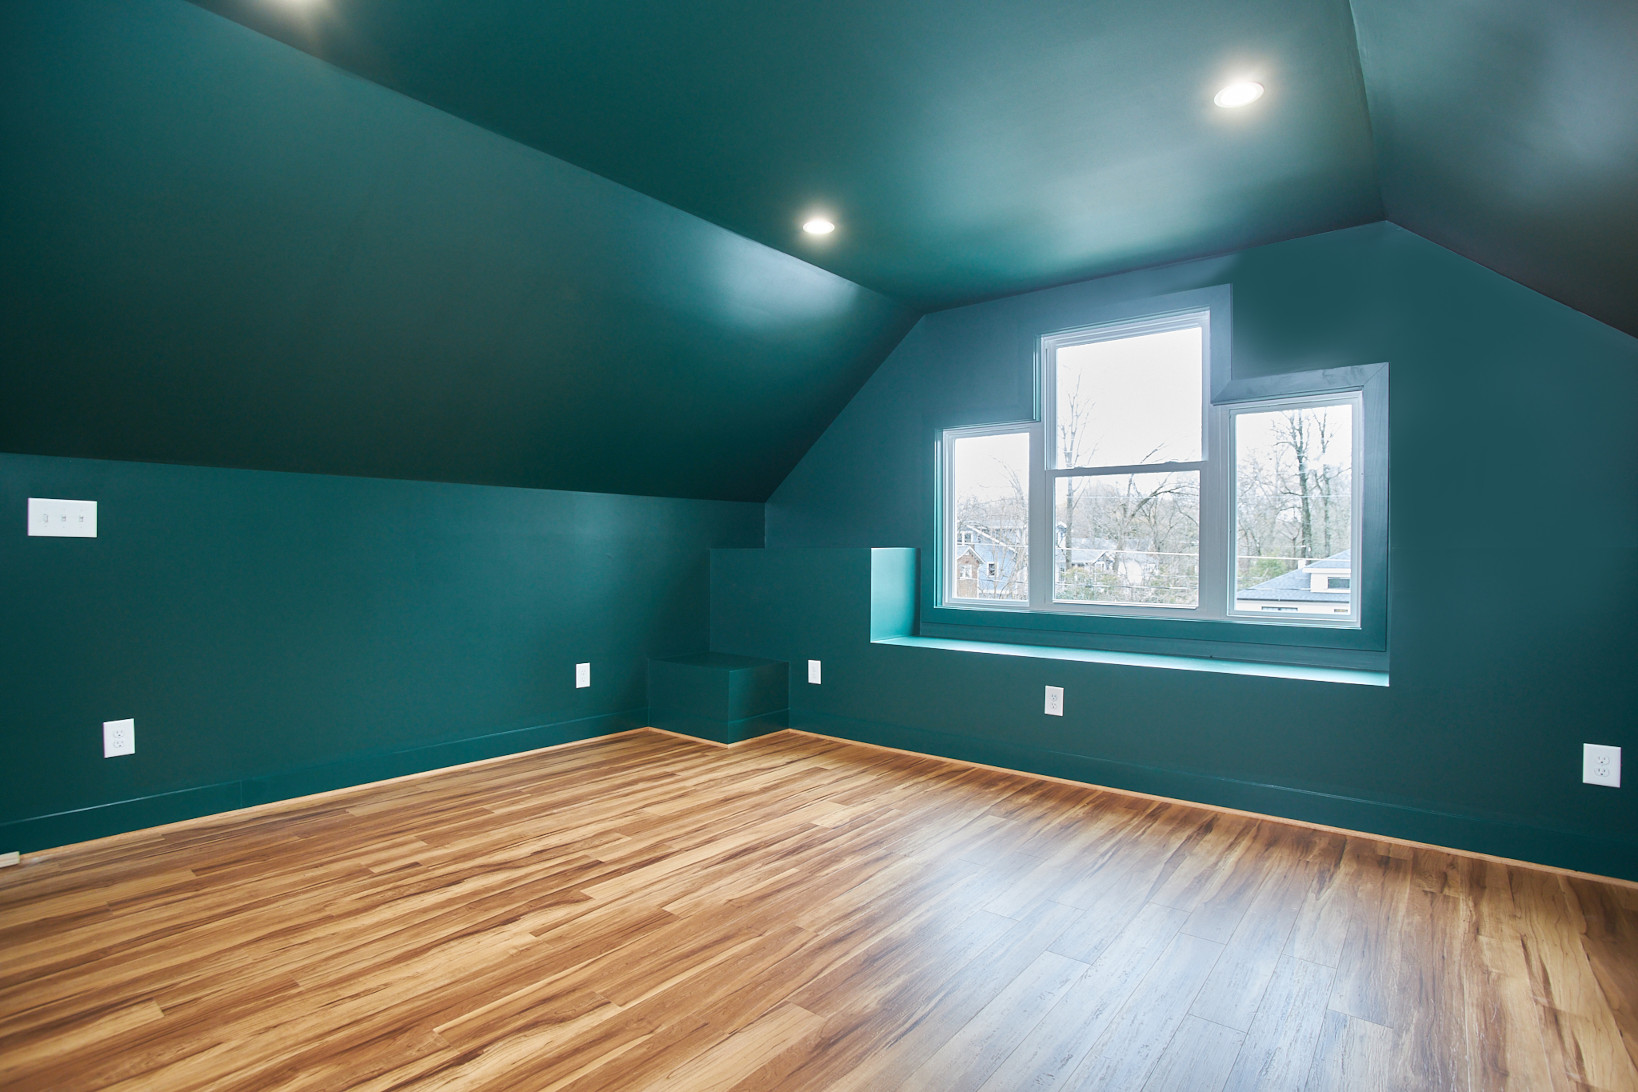 Renovated attic with hardwood floors and green walls